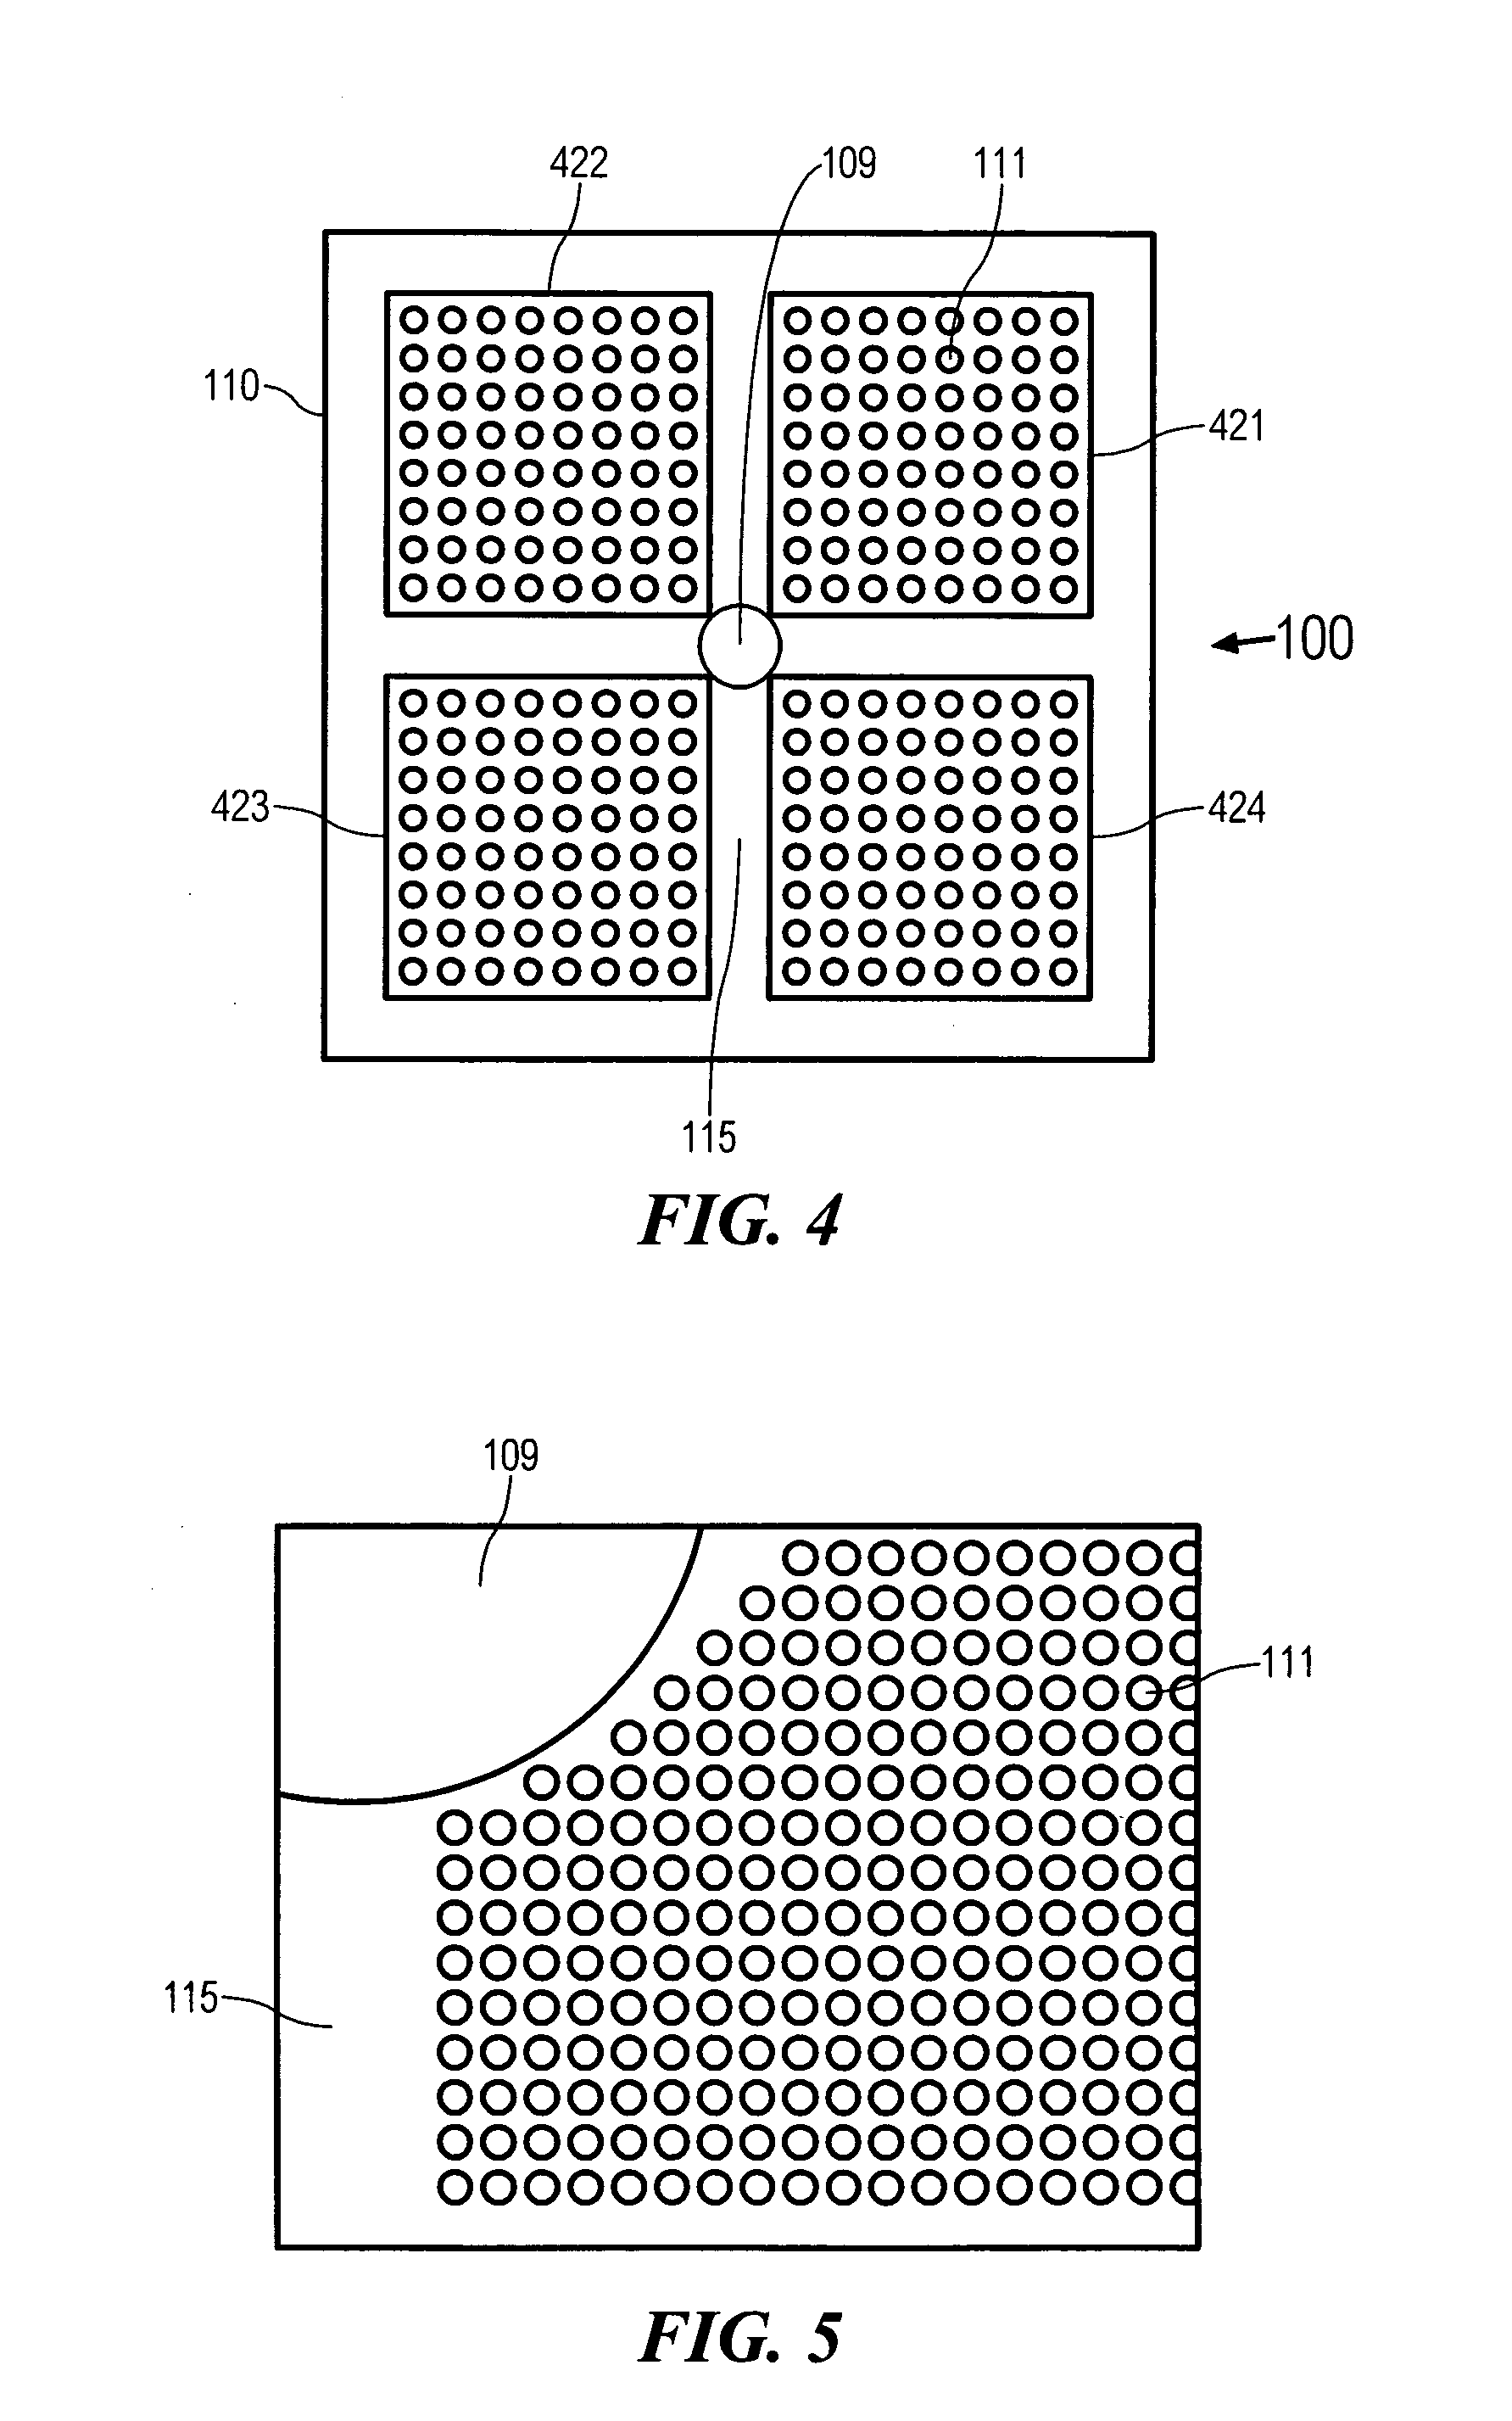 Improvements in external light efficiency of light emitting diodes